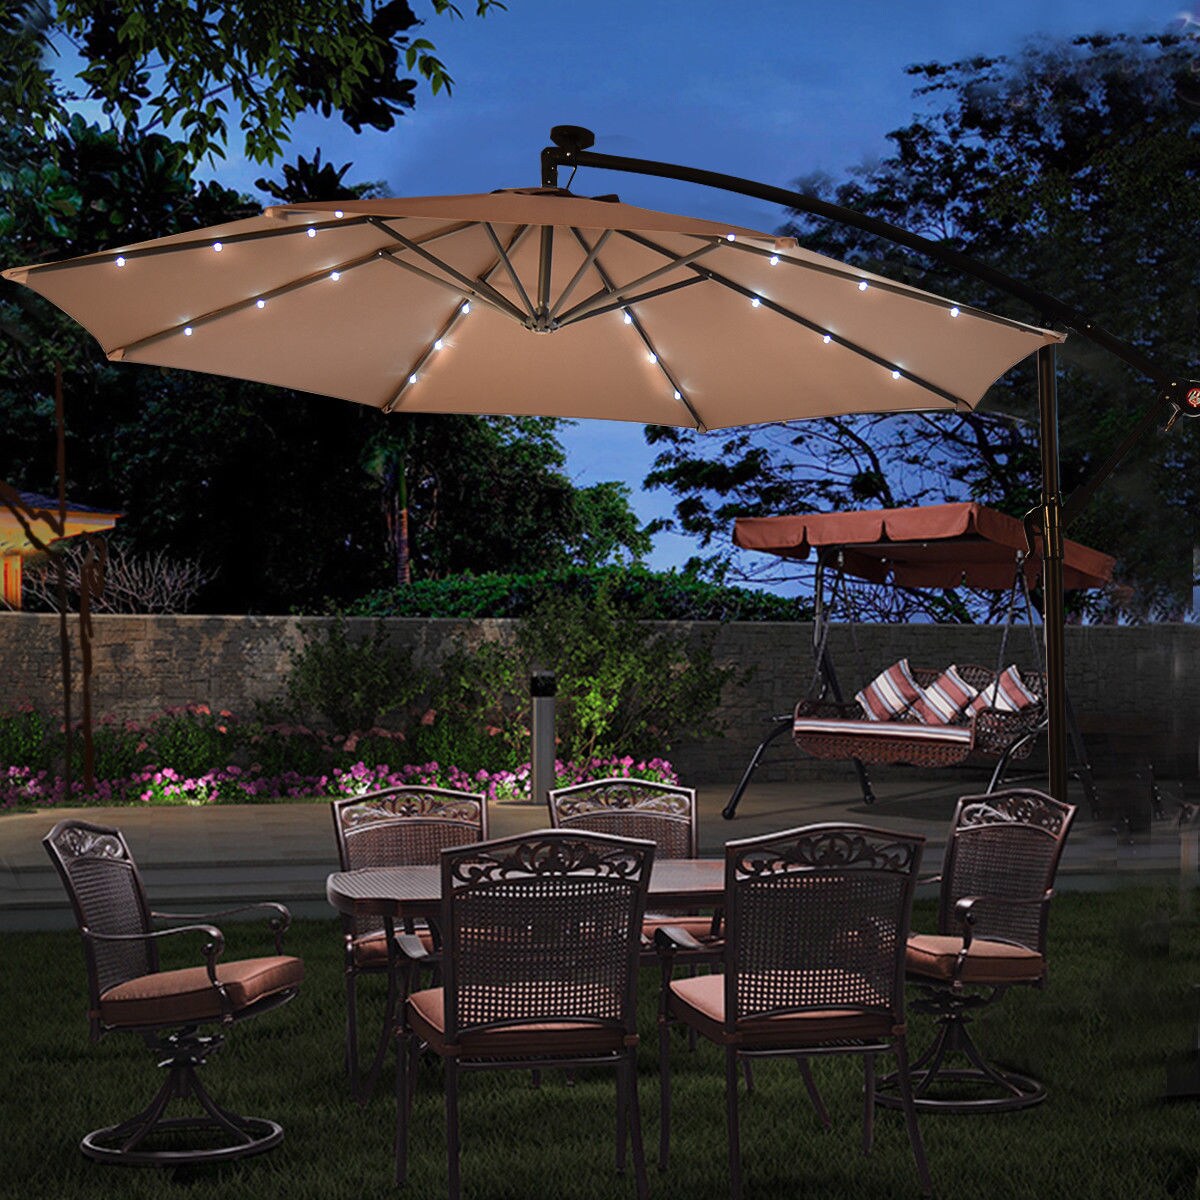 Details about   Quictent 10ft Outdoor Solar LED Hanging Patio Umbrella Offset Outdoor Sun Shade 